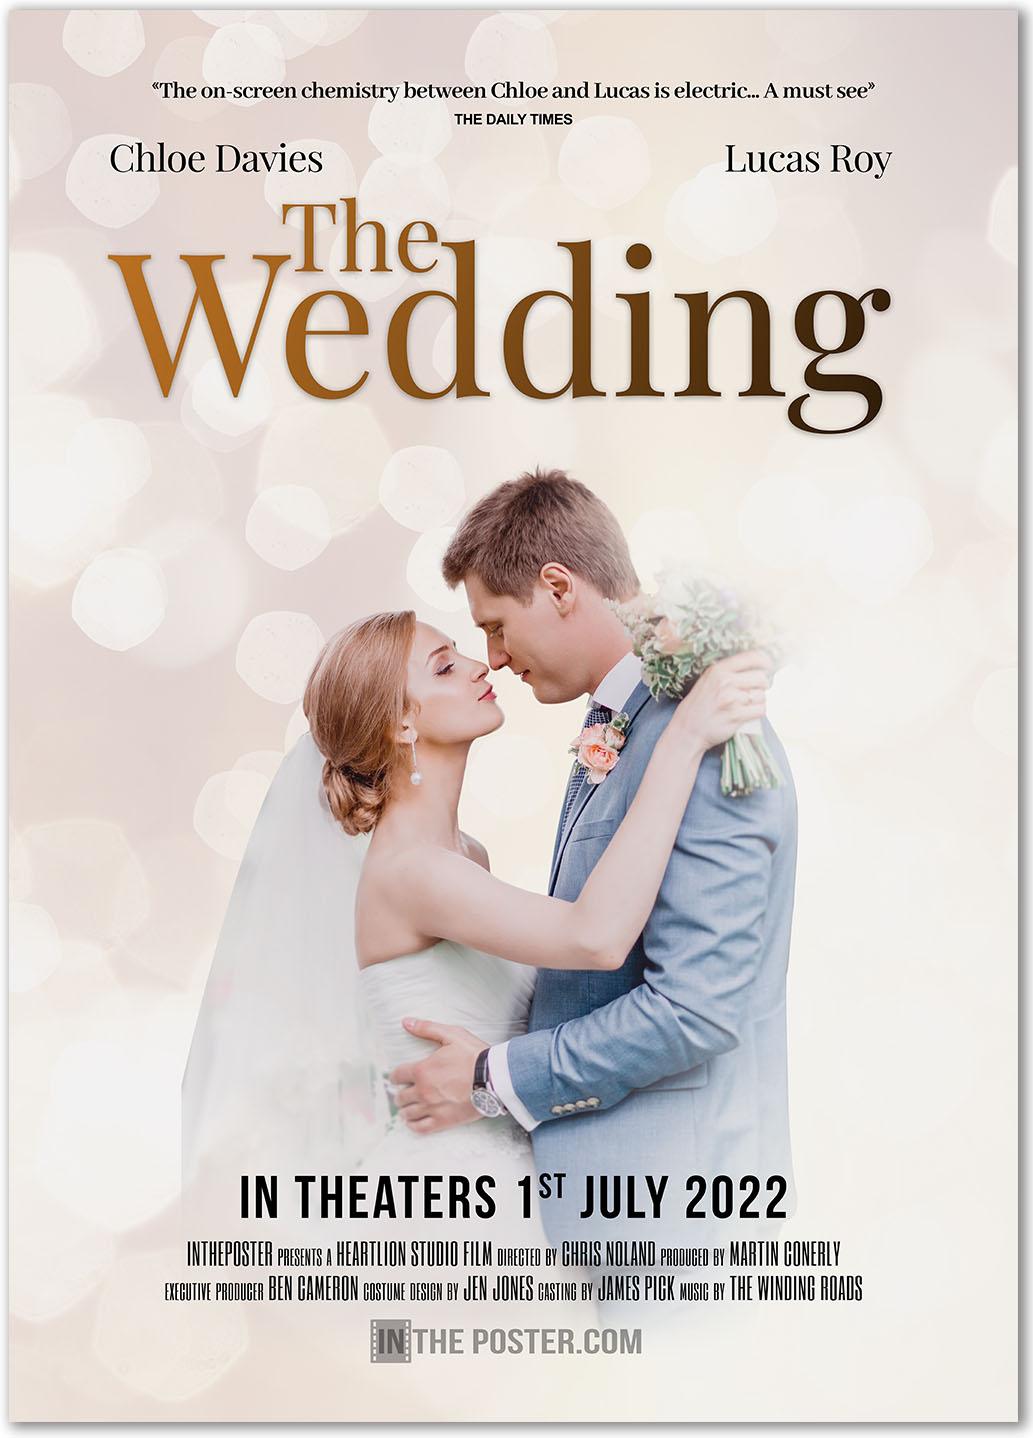 The Wedding movie poster for use at movie themed weddings with soft white lights and a woman in a wedding dress holding flowers embraces a man in a blue suit 